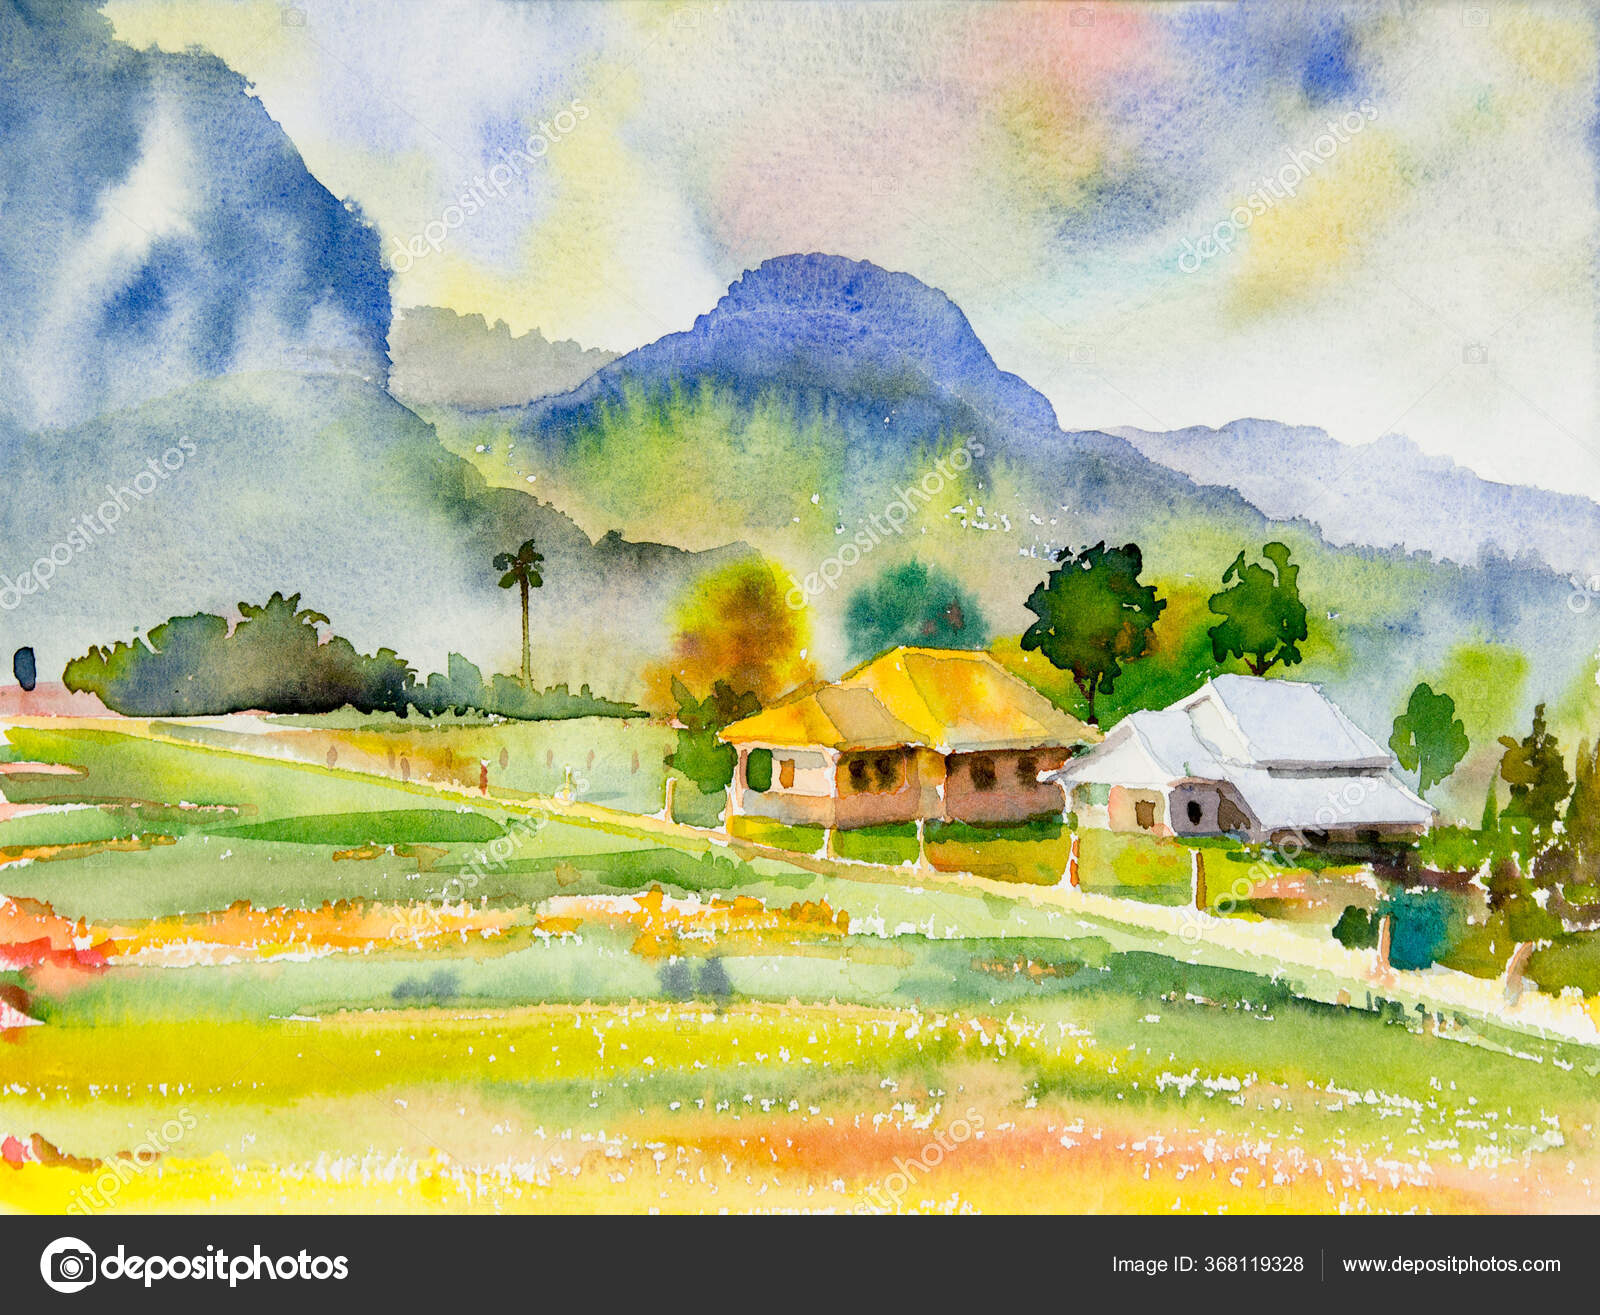 Paintings Watercolor Landscape Original Home Mountain Hill Cornfield Stock Photo by ©paint-mm 368119328